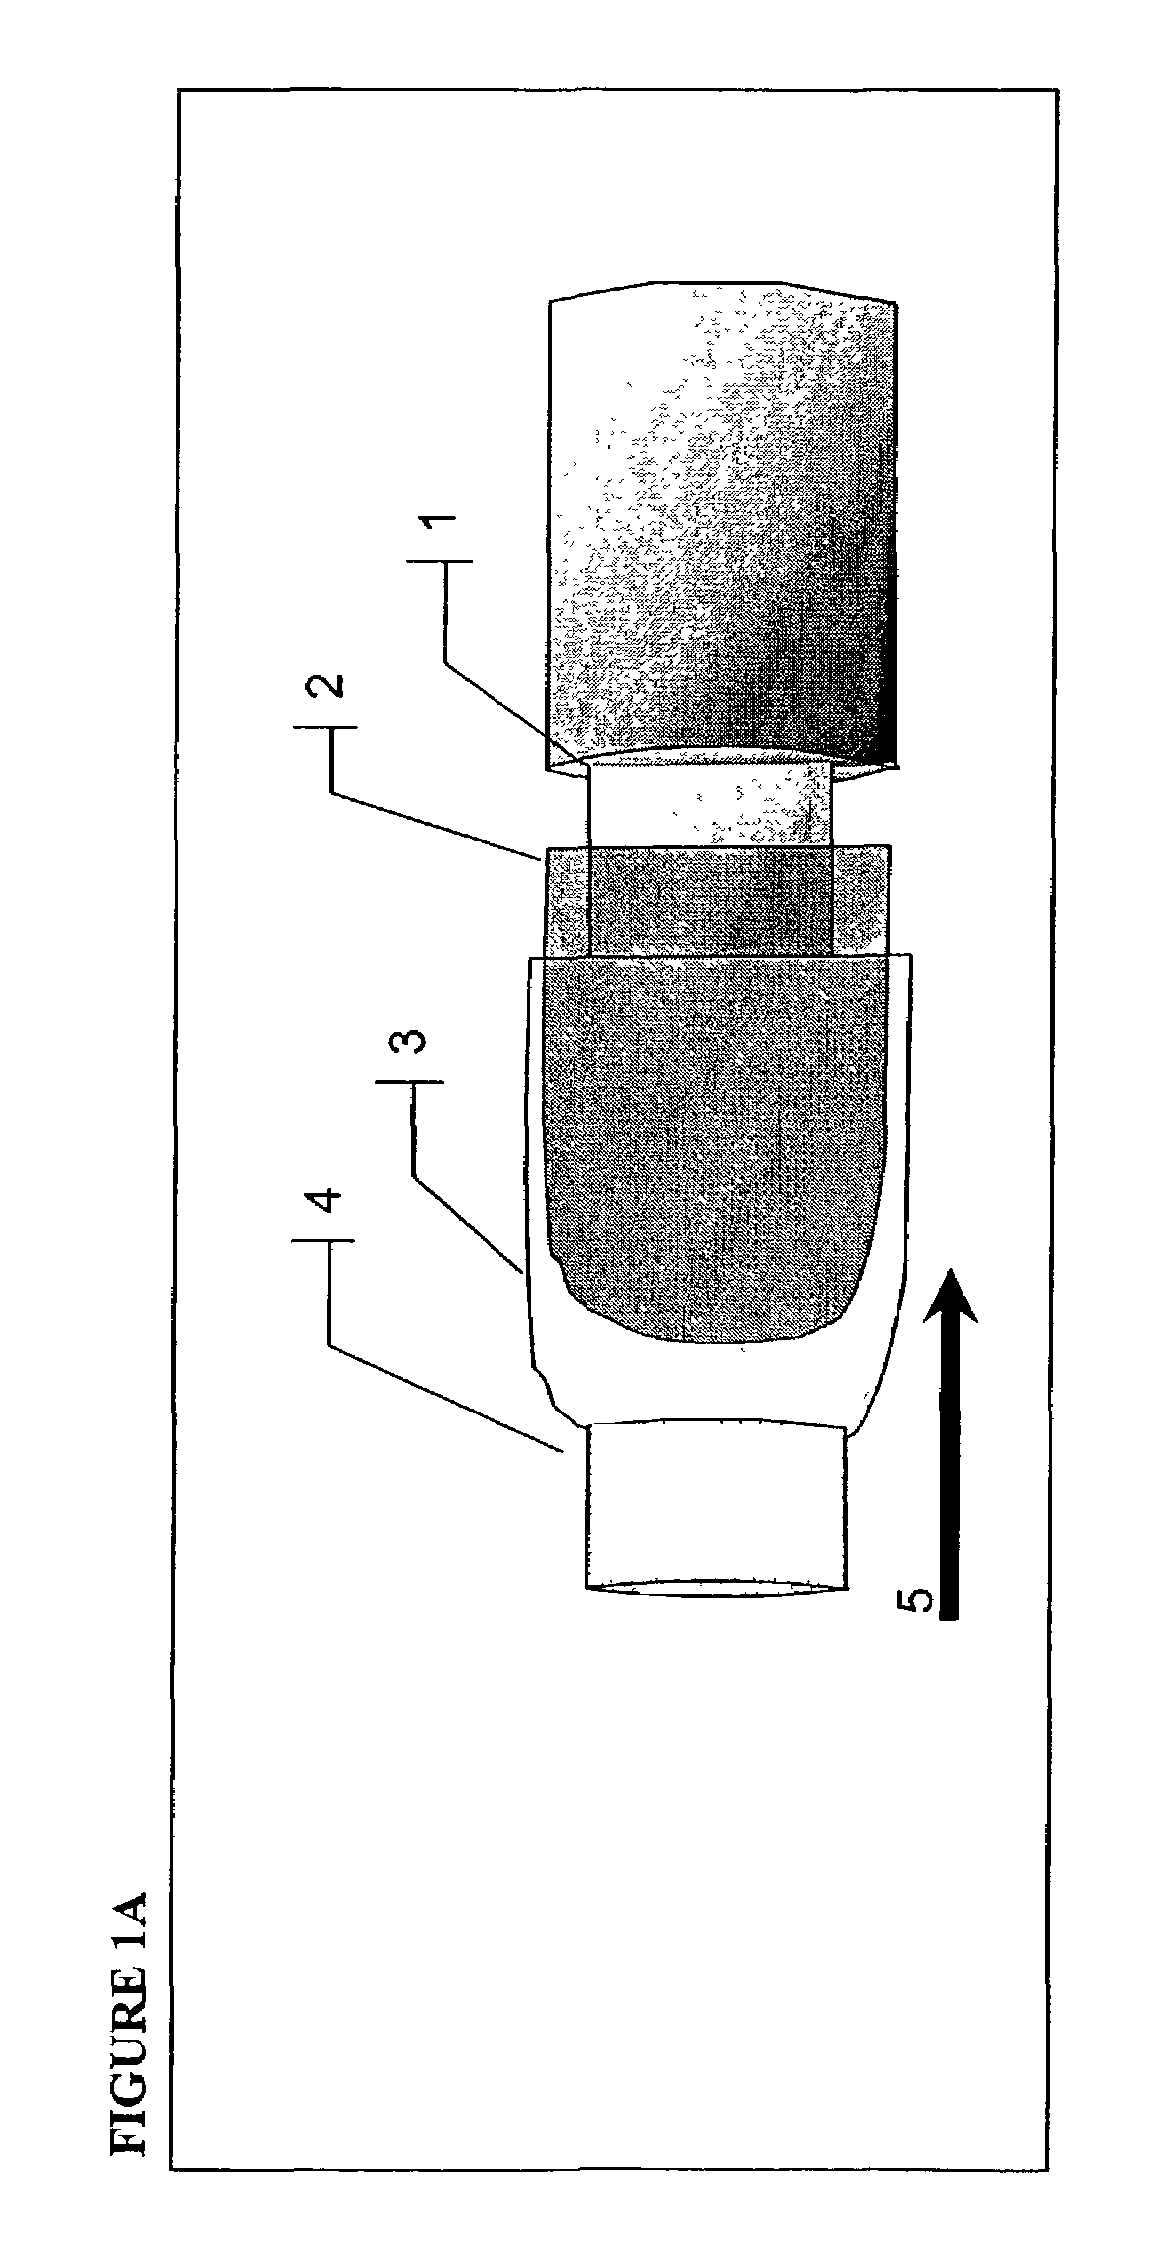 Method for diagnosis of helicobacter pylori infection